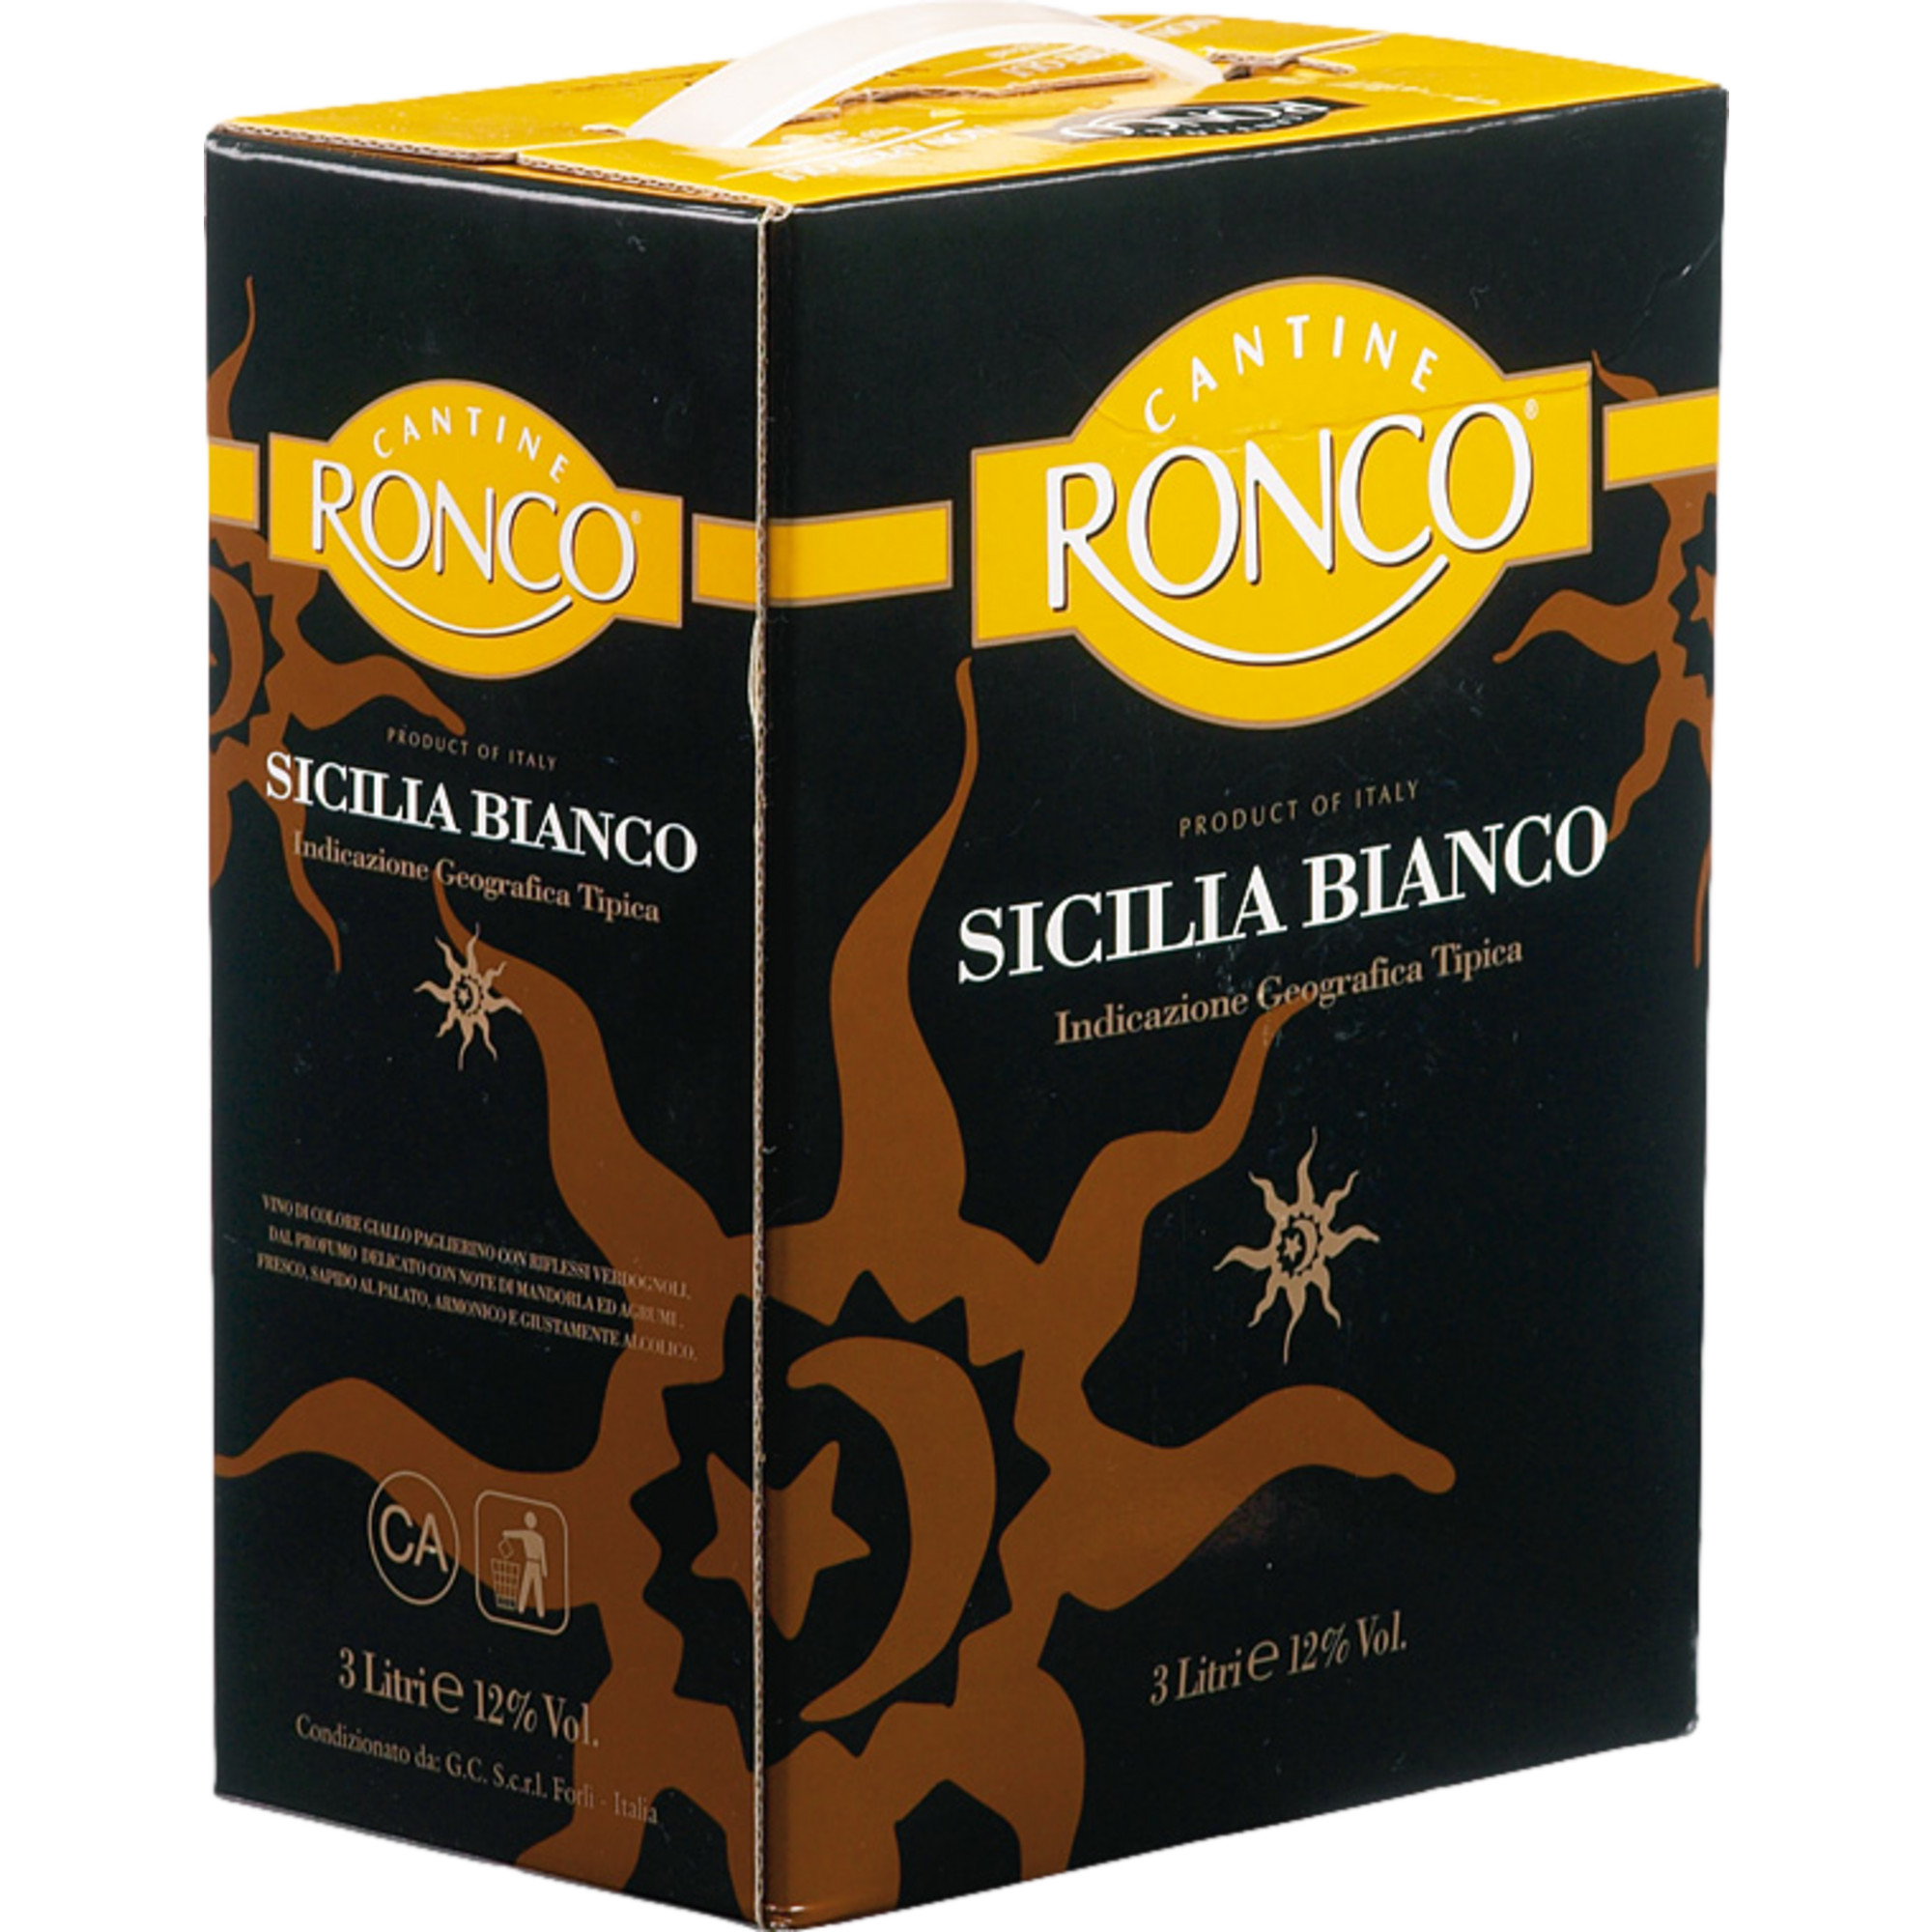 Cantine Ronco, Terre Siciliane IGT, 3,0 L, Bag in Box, Sizilien, Weißwein